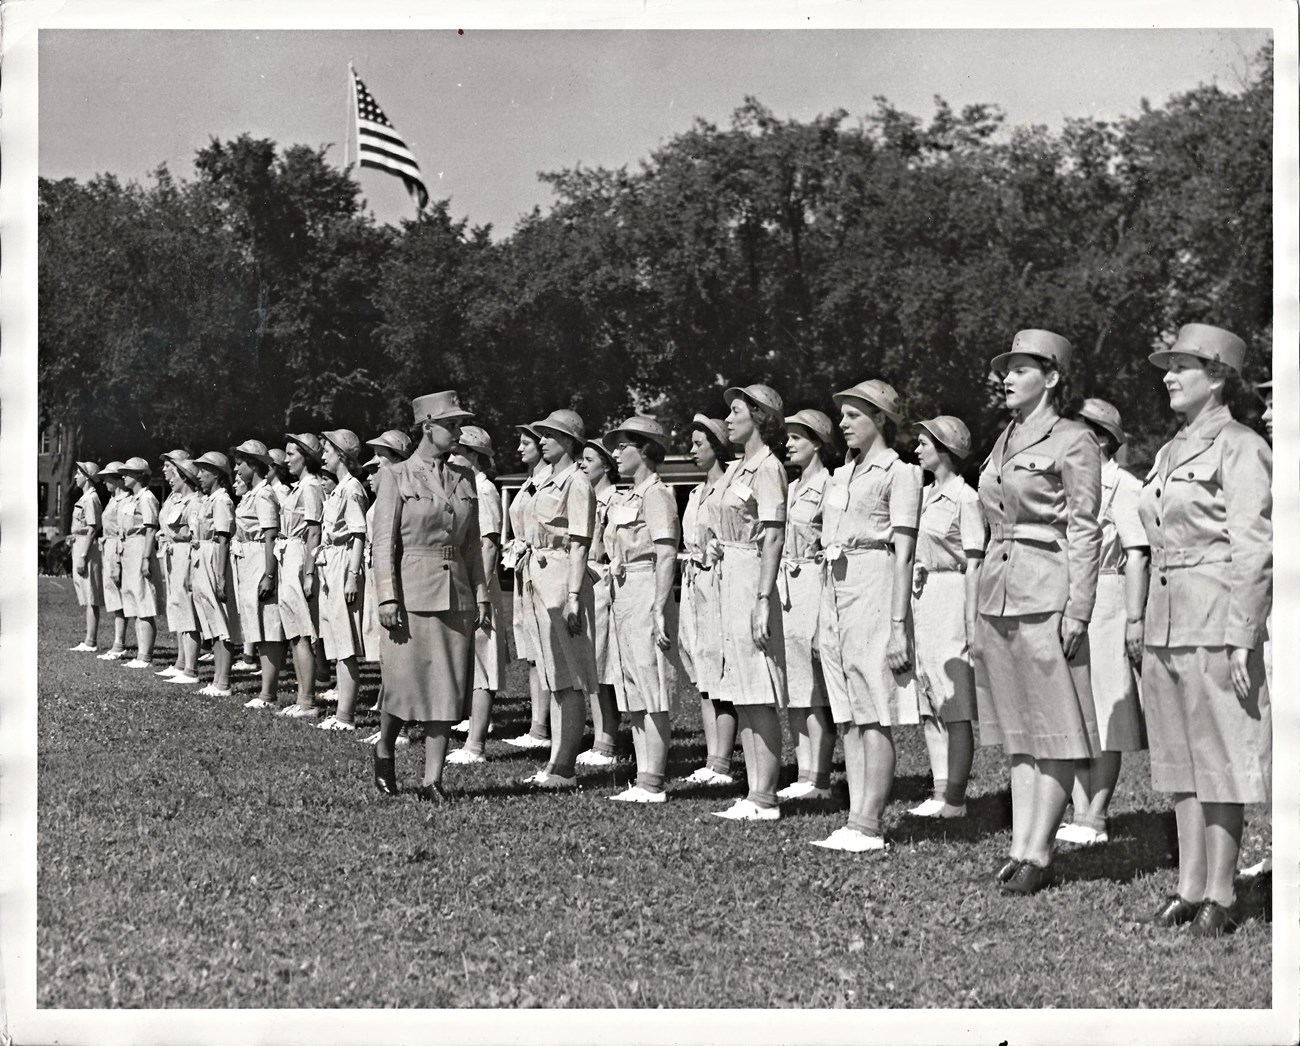 Women in uniforms (collared, light-color dresses) and round, brimmed hats stand at attention side by side for inspection on a grassy lawn. Tops of trees and an American flag are visible in the background